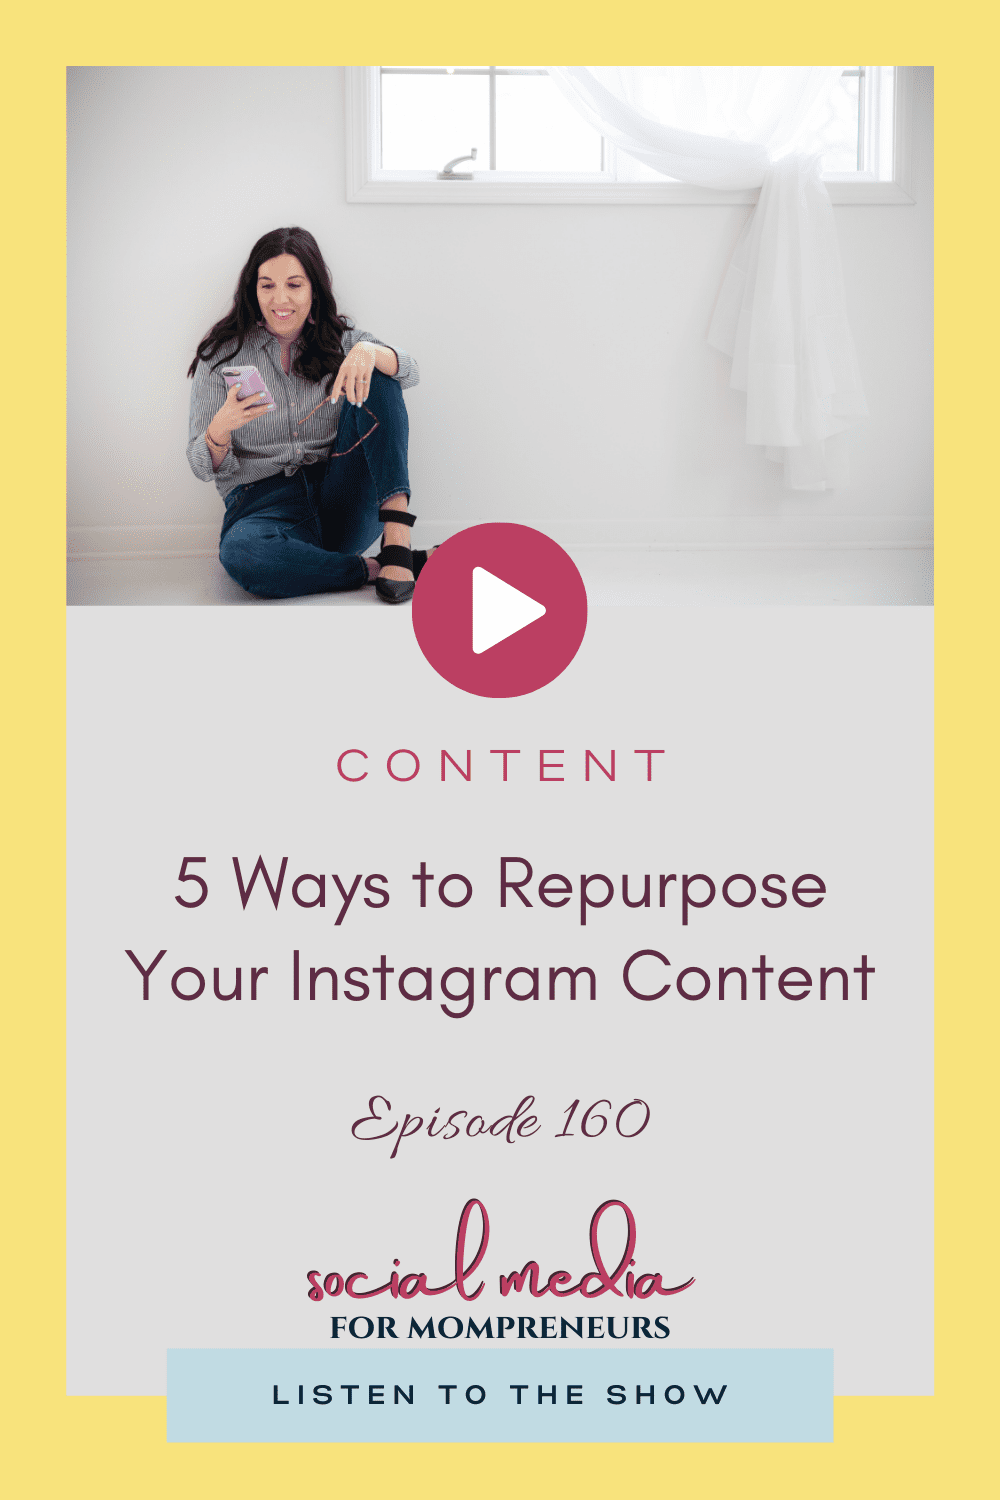 yellow gray graphic with a woman, social media for mompreneurs podcast, 5 ways to repurpose Instagram content